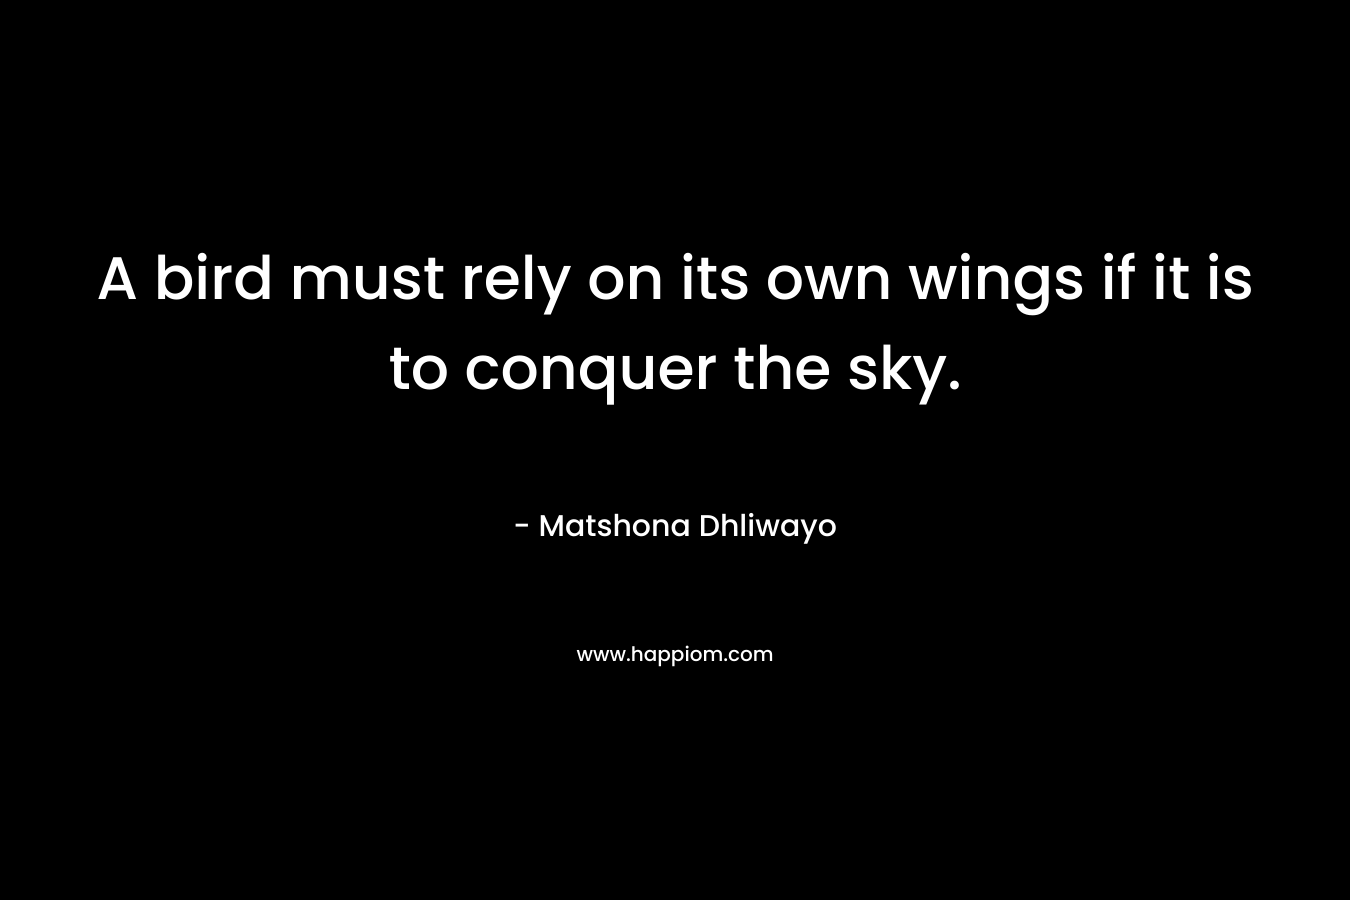 A bird must rely on its own wings if it is to conquer the sky.